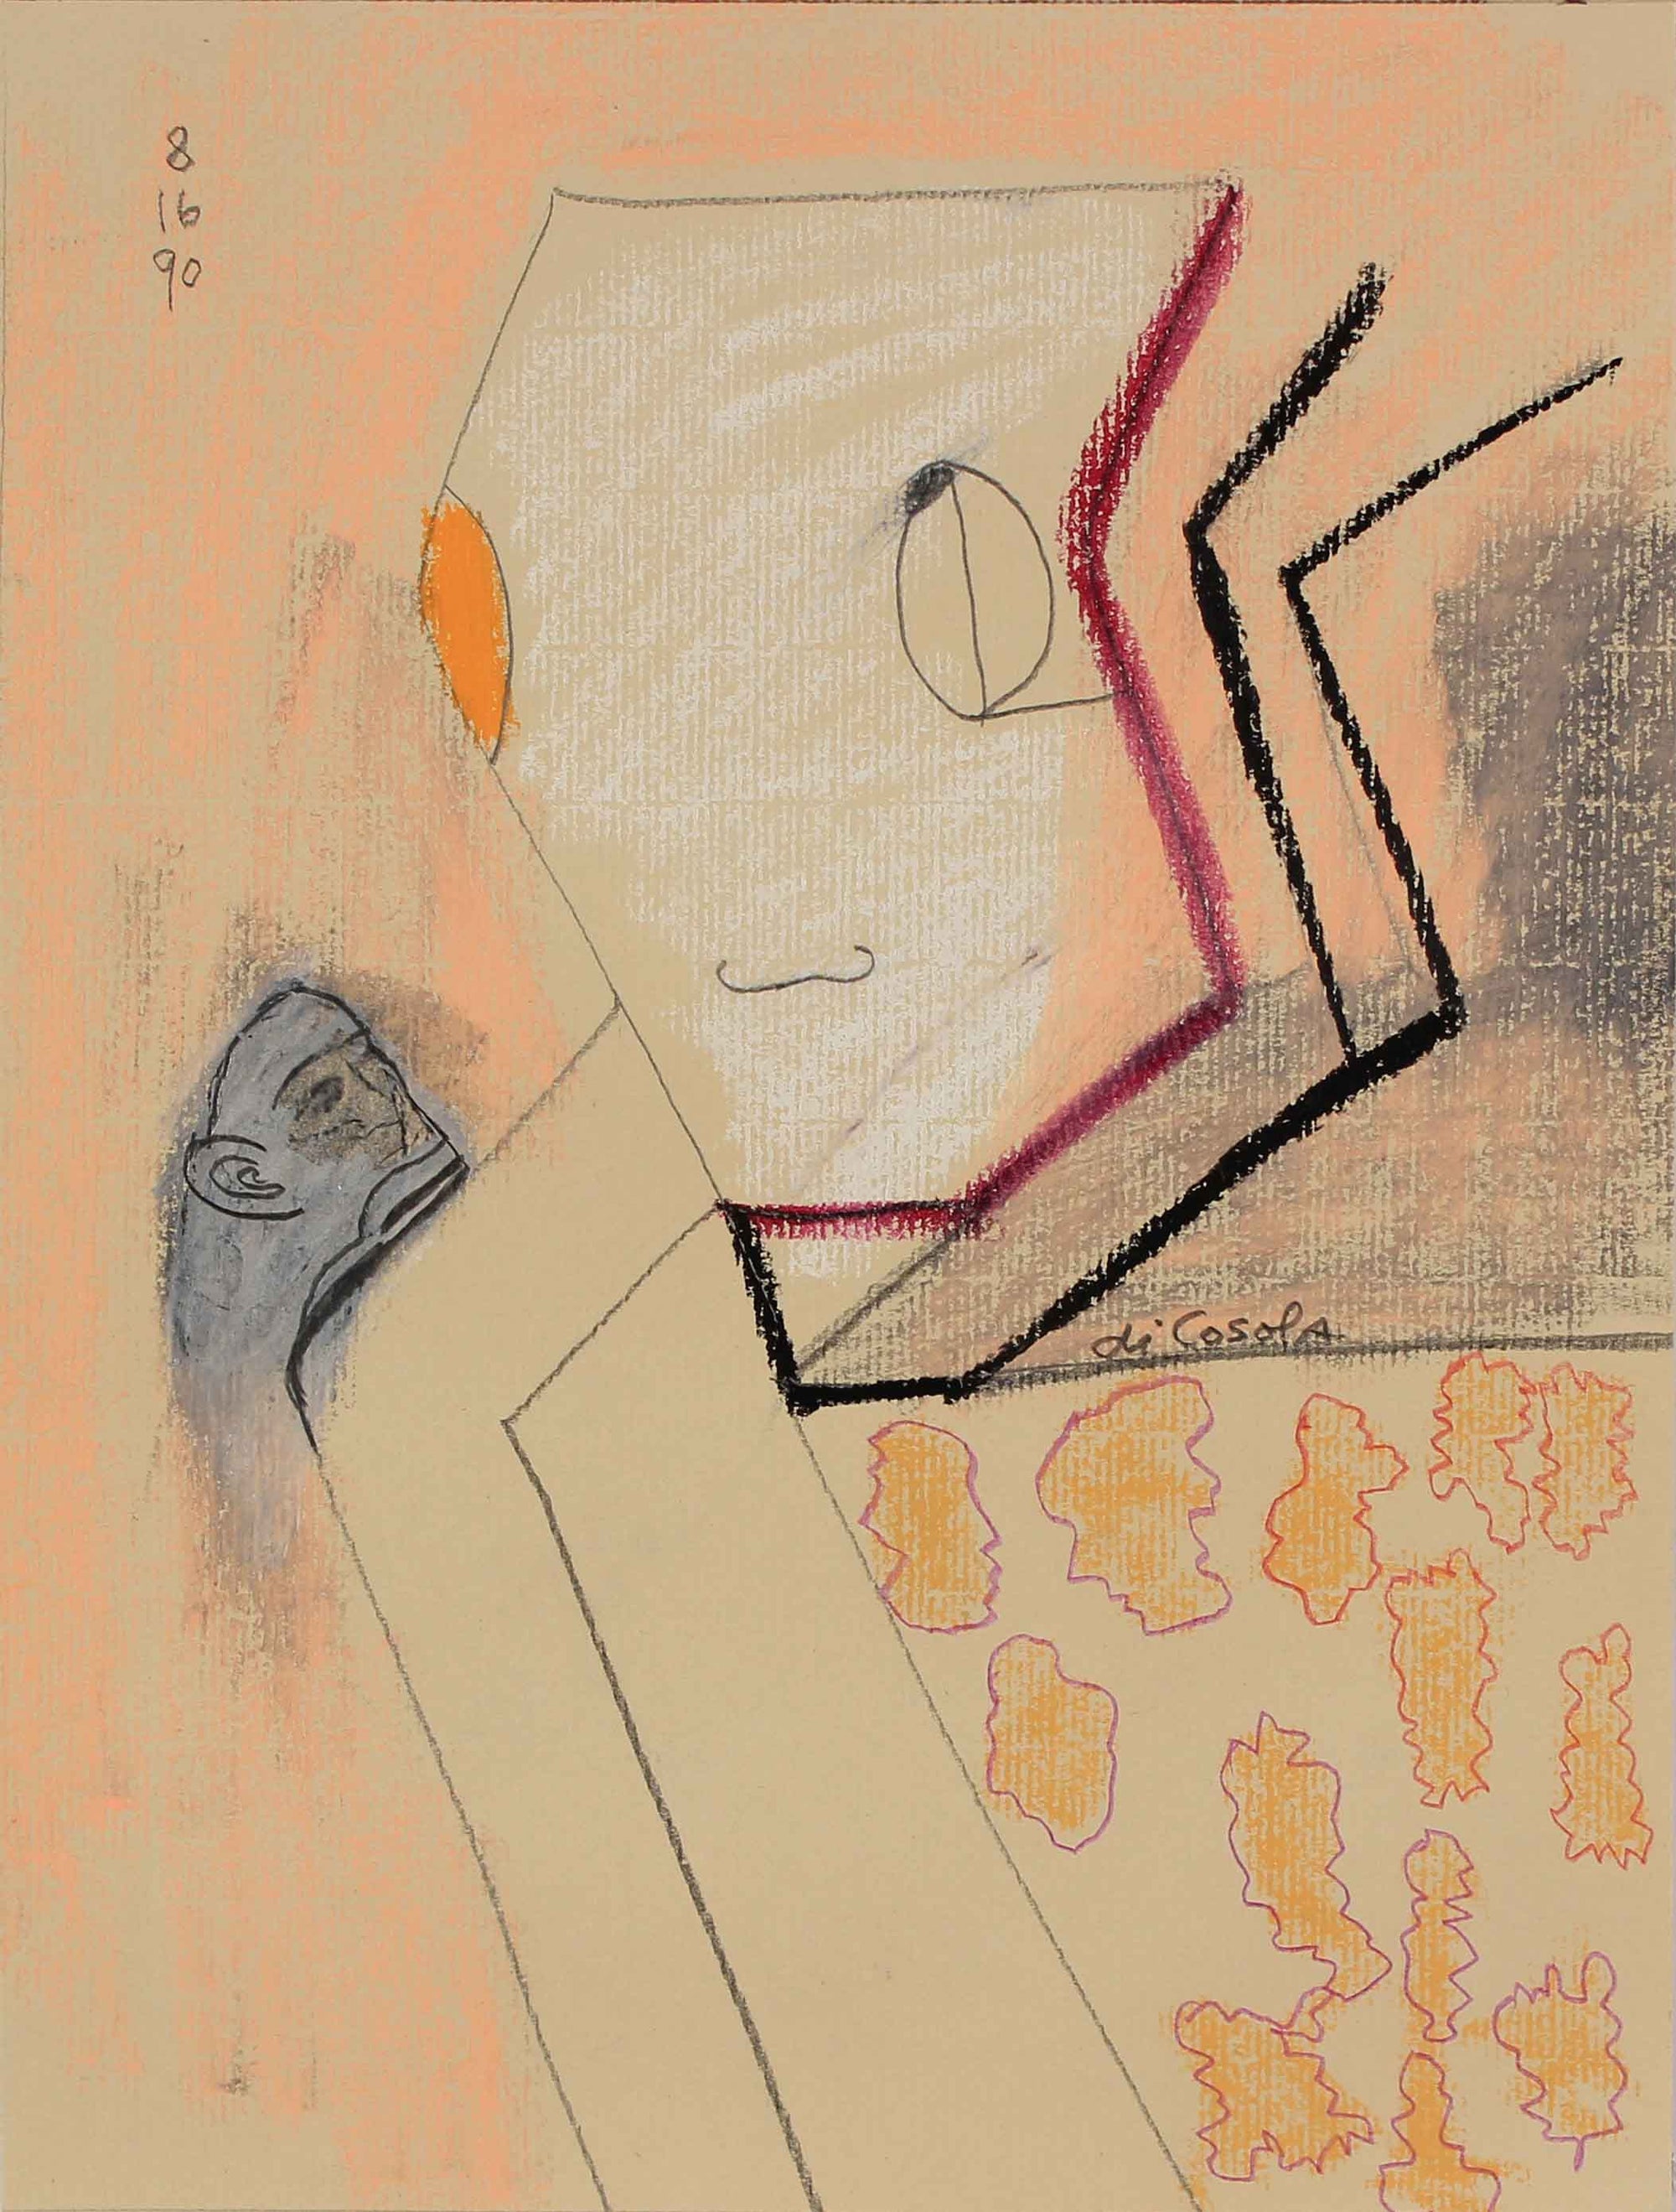 Abstract Surreal Portrait<br>1990 Oil Pastel & Graphite<br><br>#83845